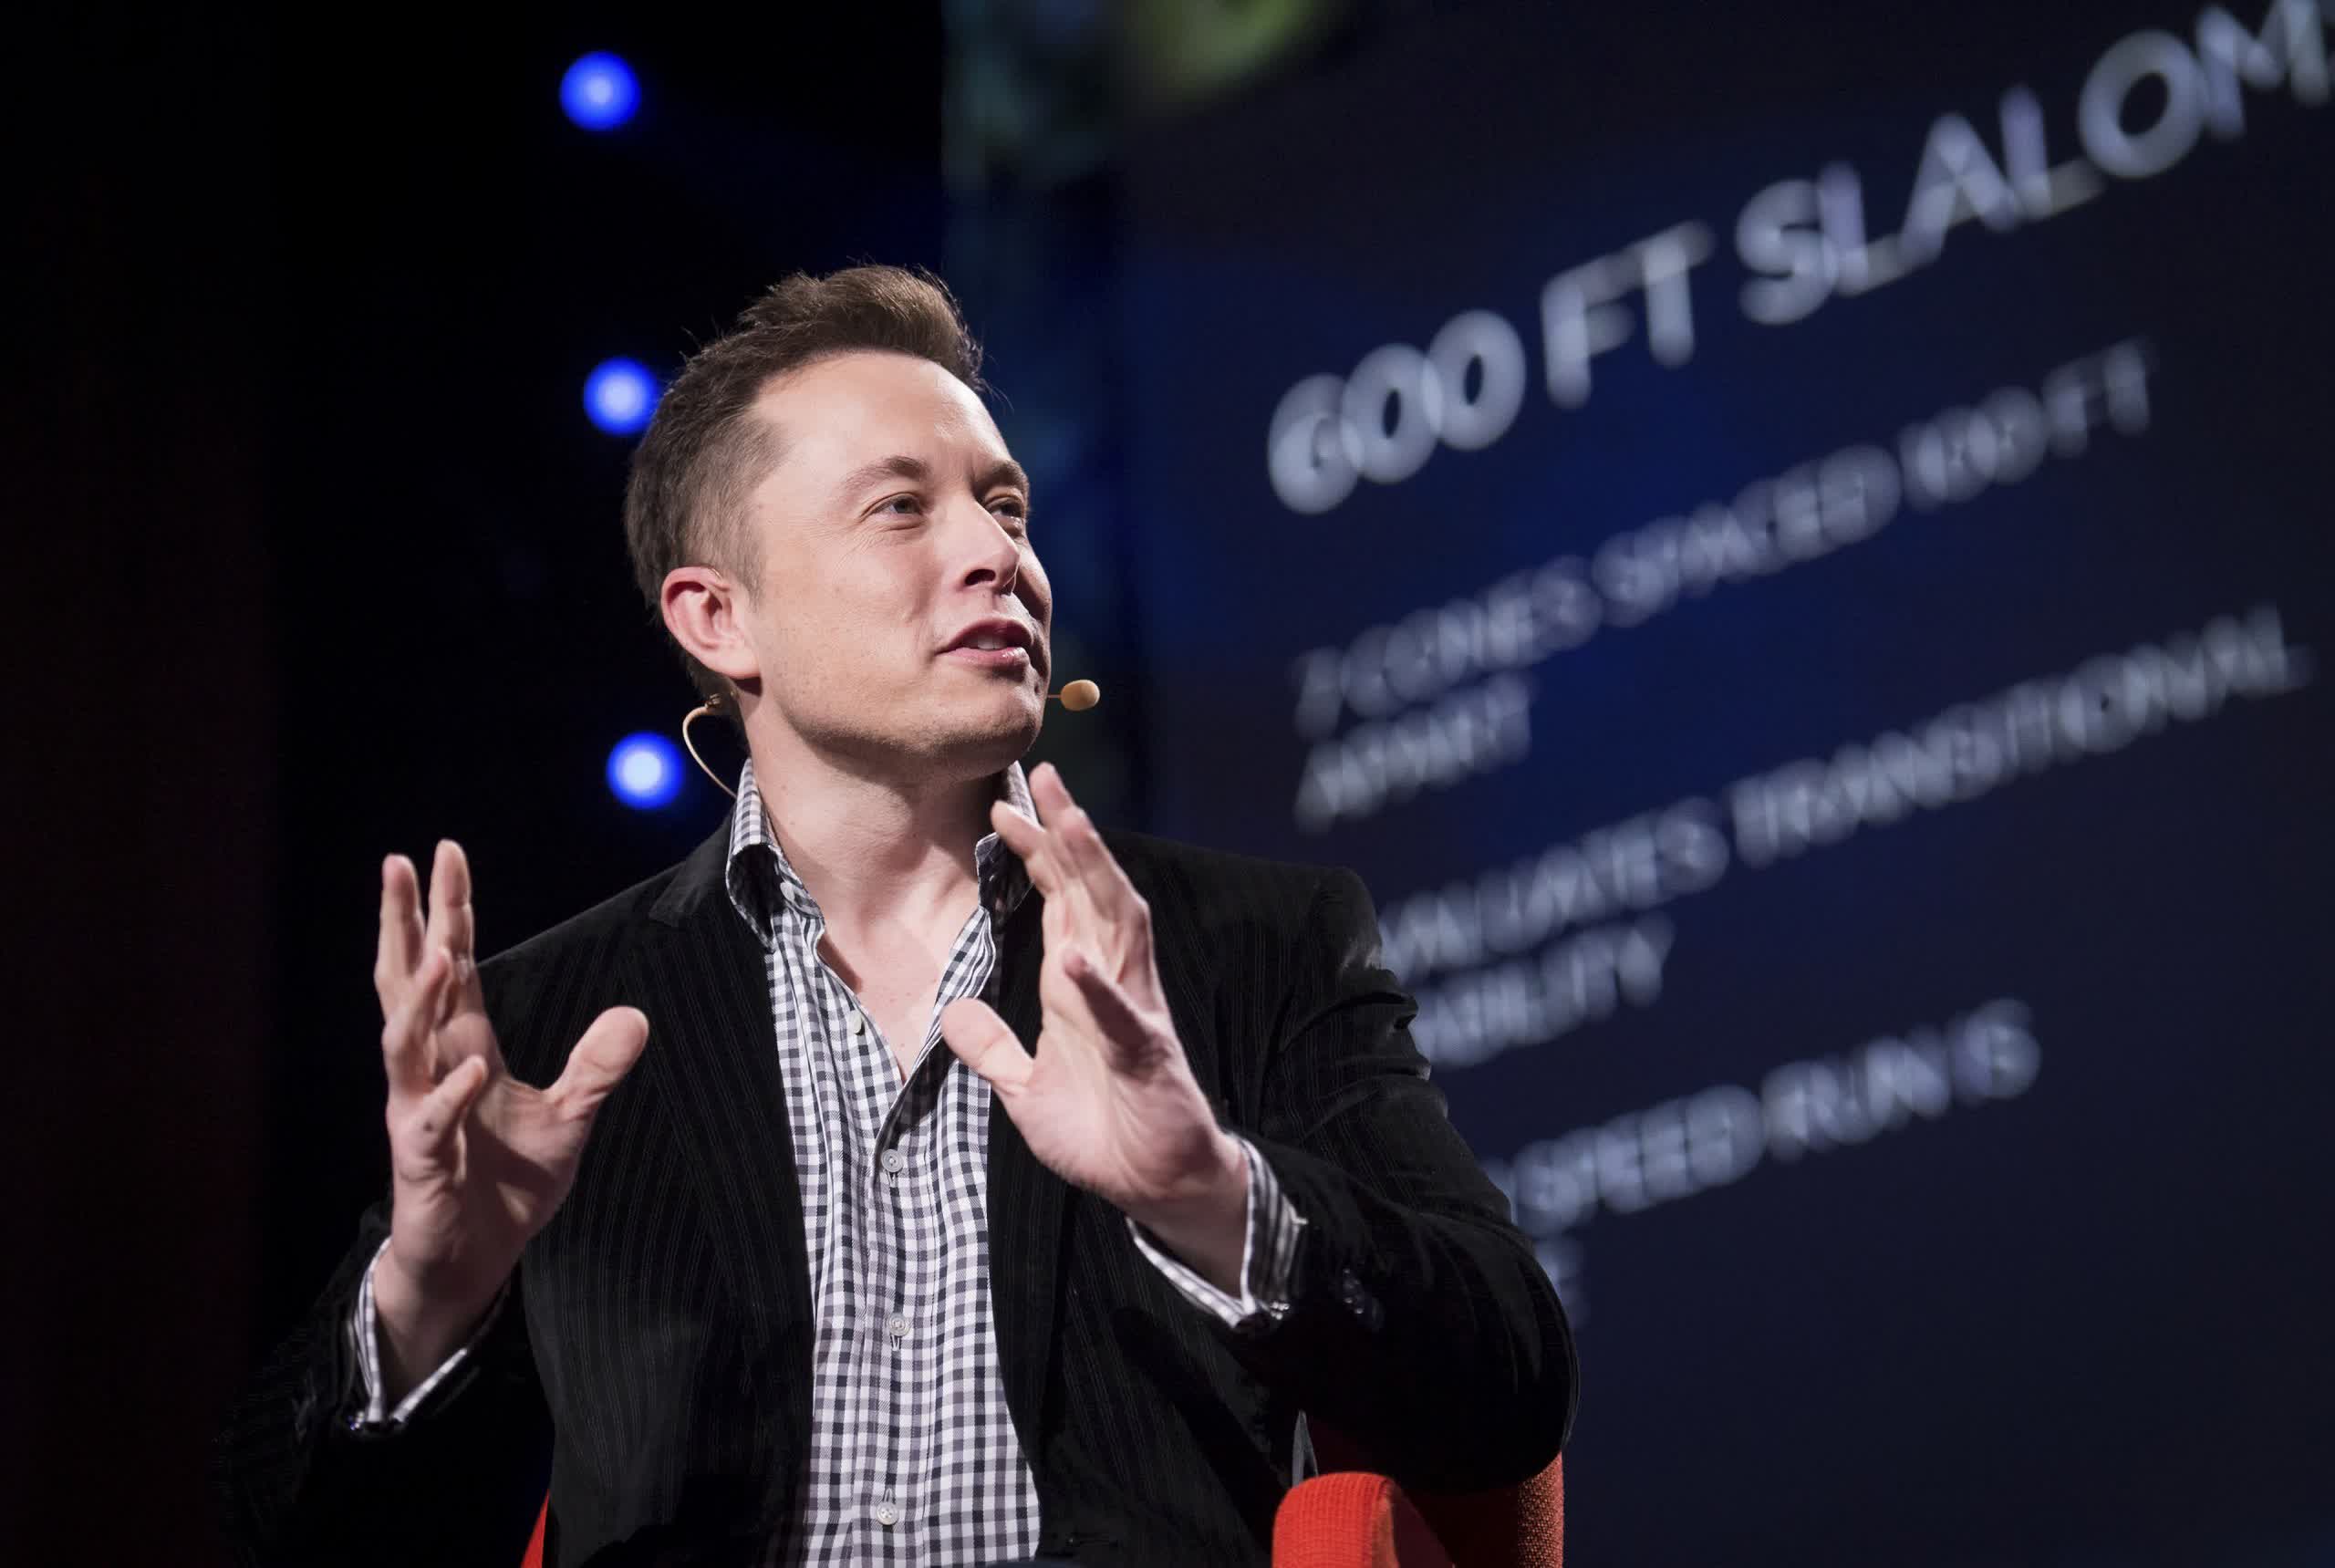 Musk looks to end acquisition, says Twitter hasn't provided required data